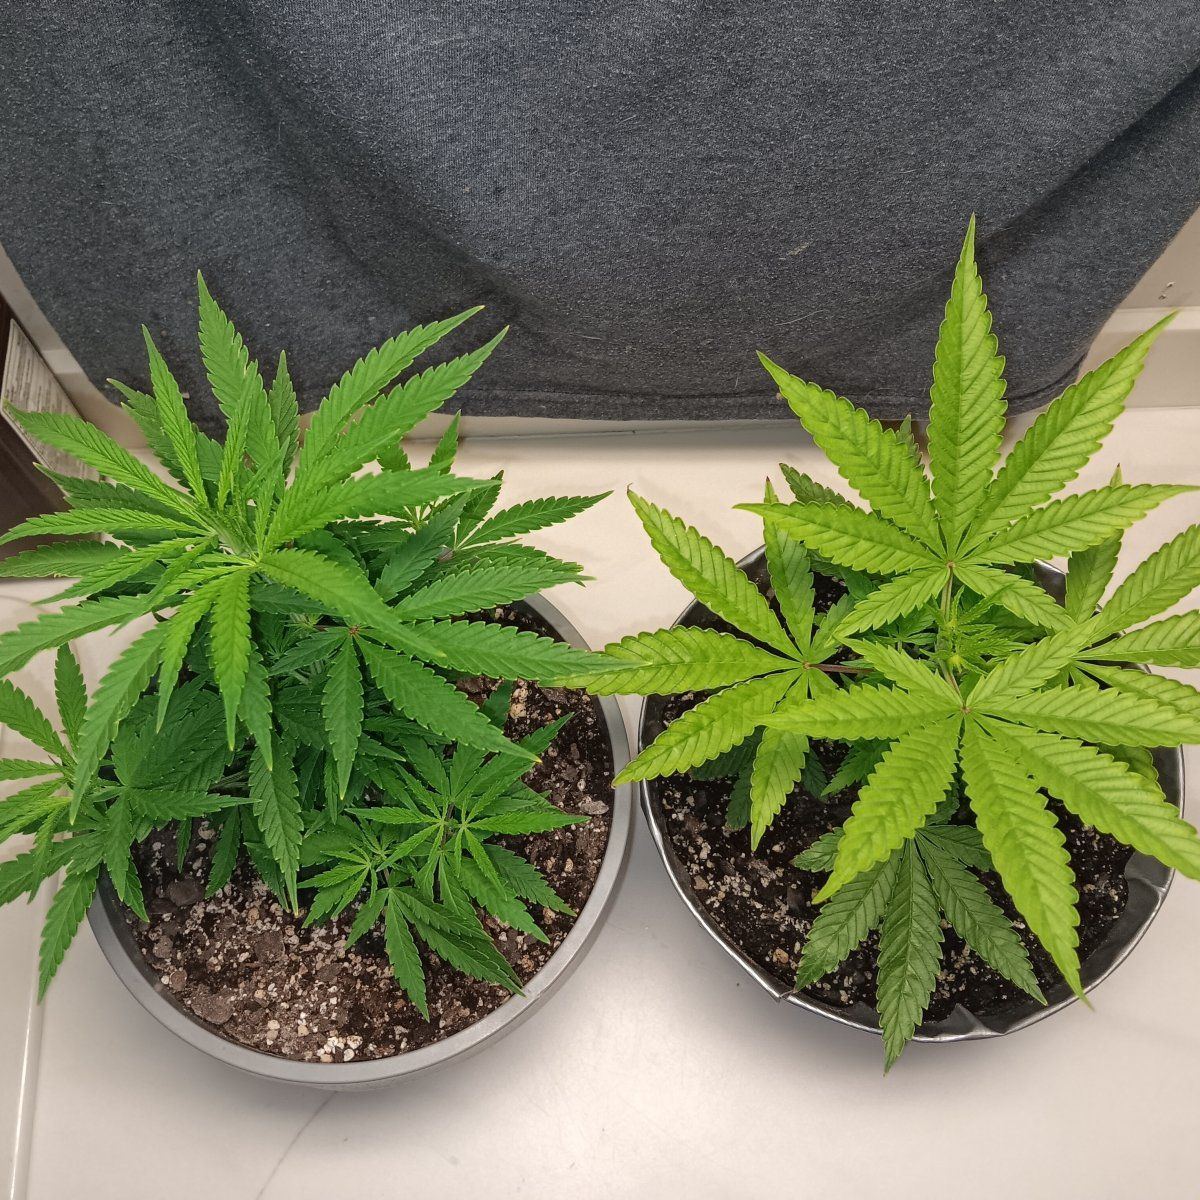 Any help would be appreciated new grower here having a color issue with one plant being too li